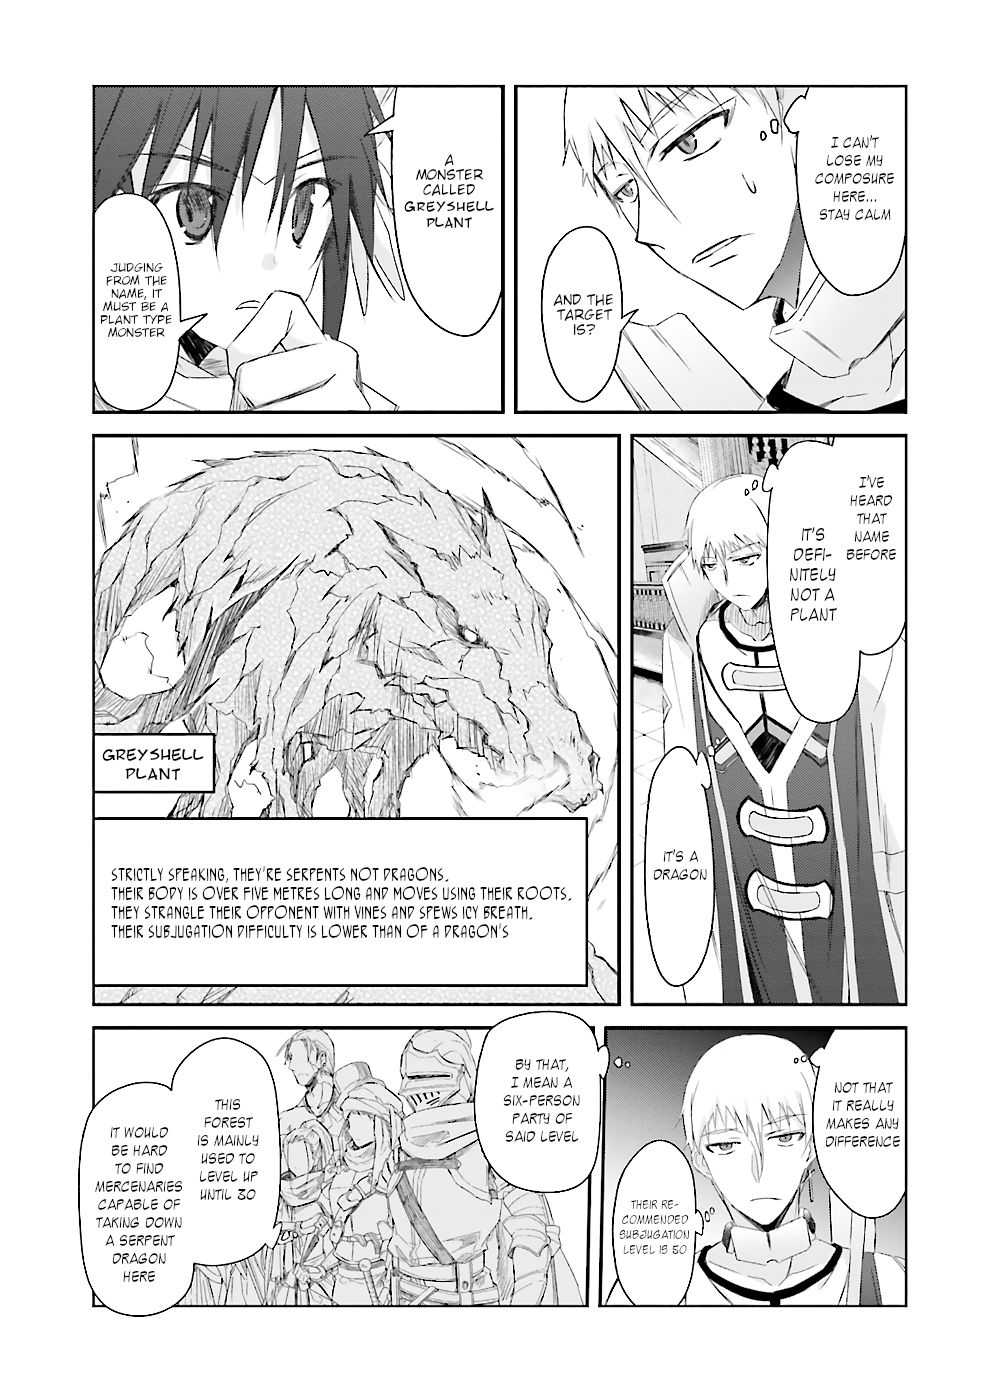 A Simple Task Of Providing Support From The Shadows To Defeat The Demon Lord - chapter 4 - #4